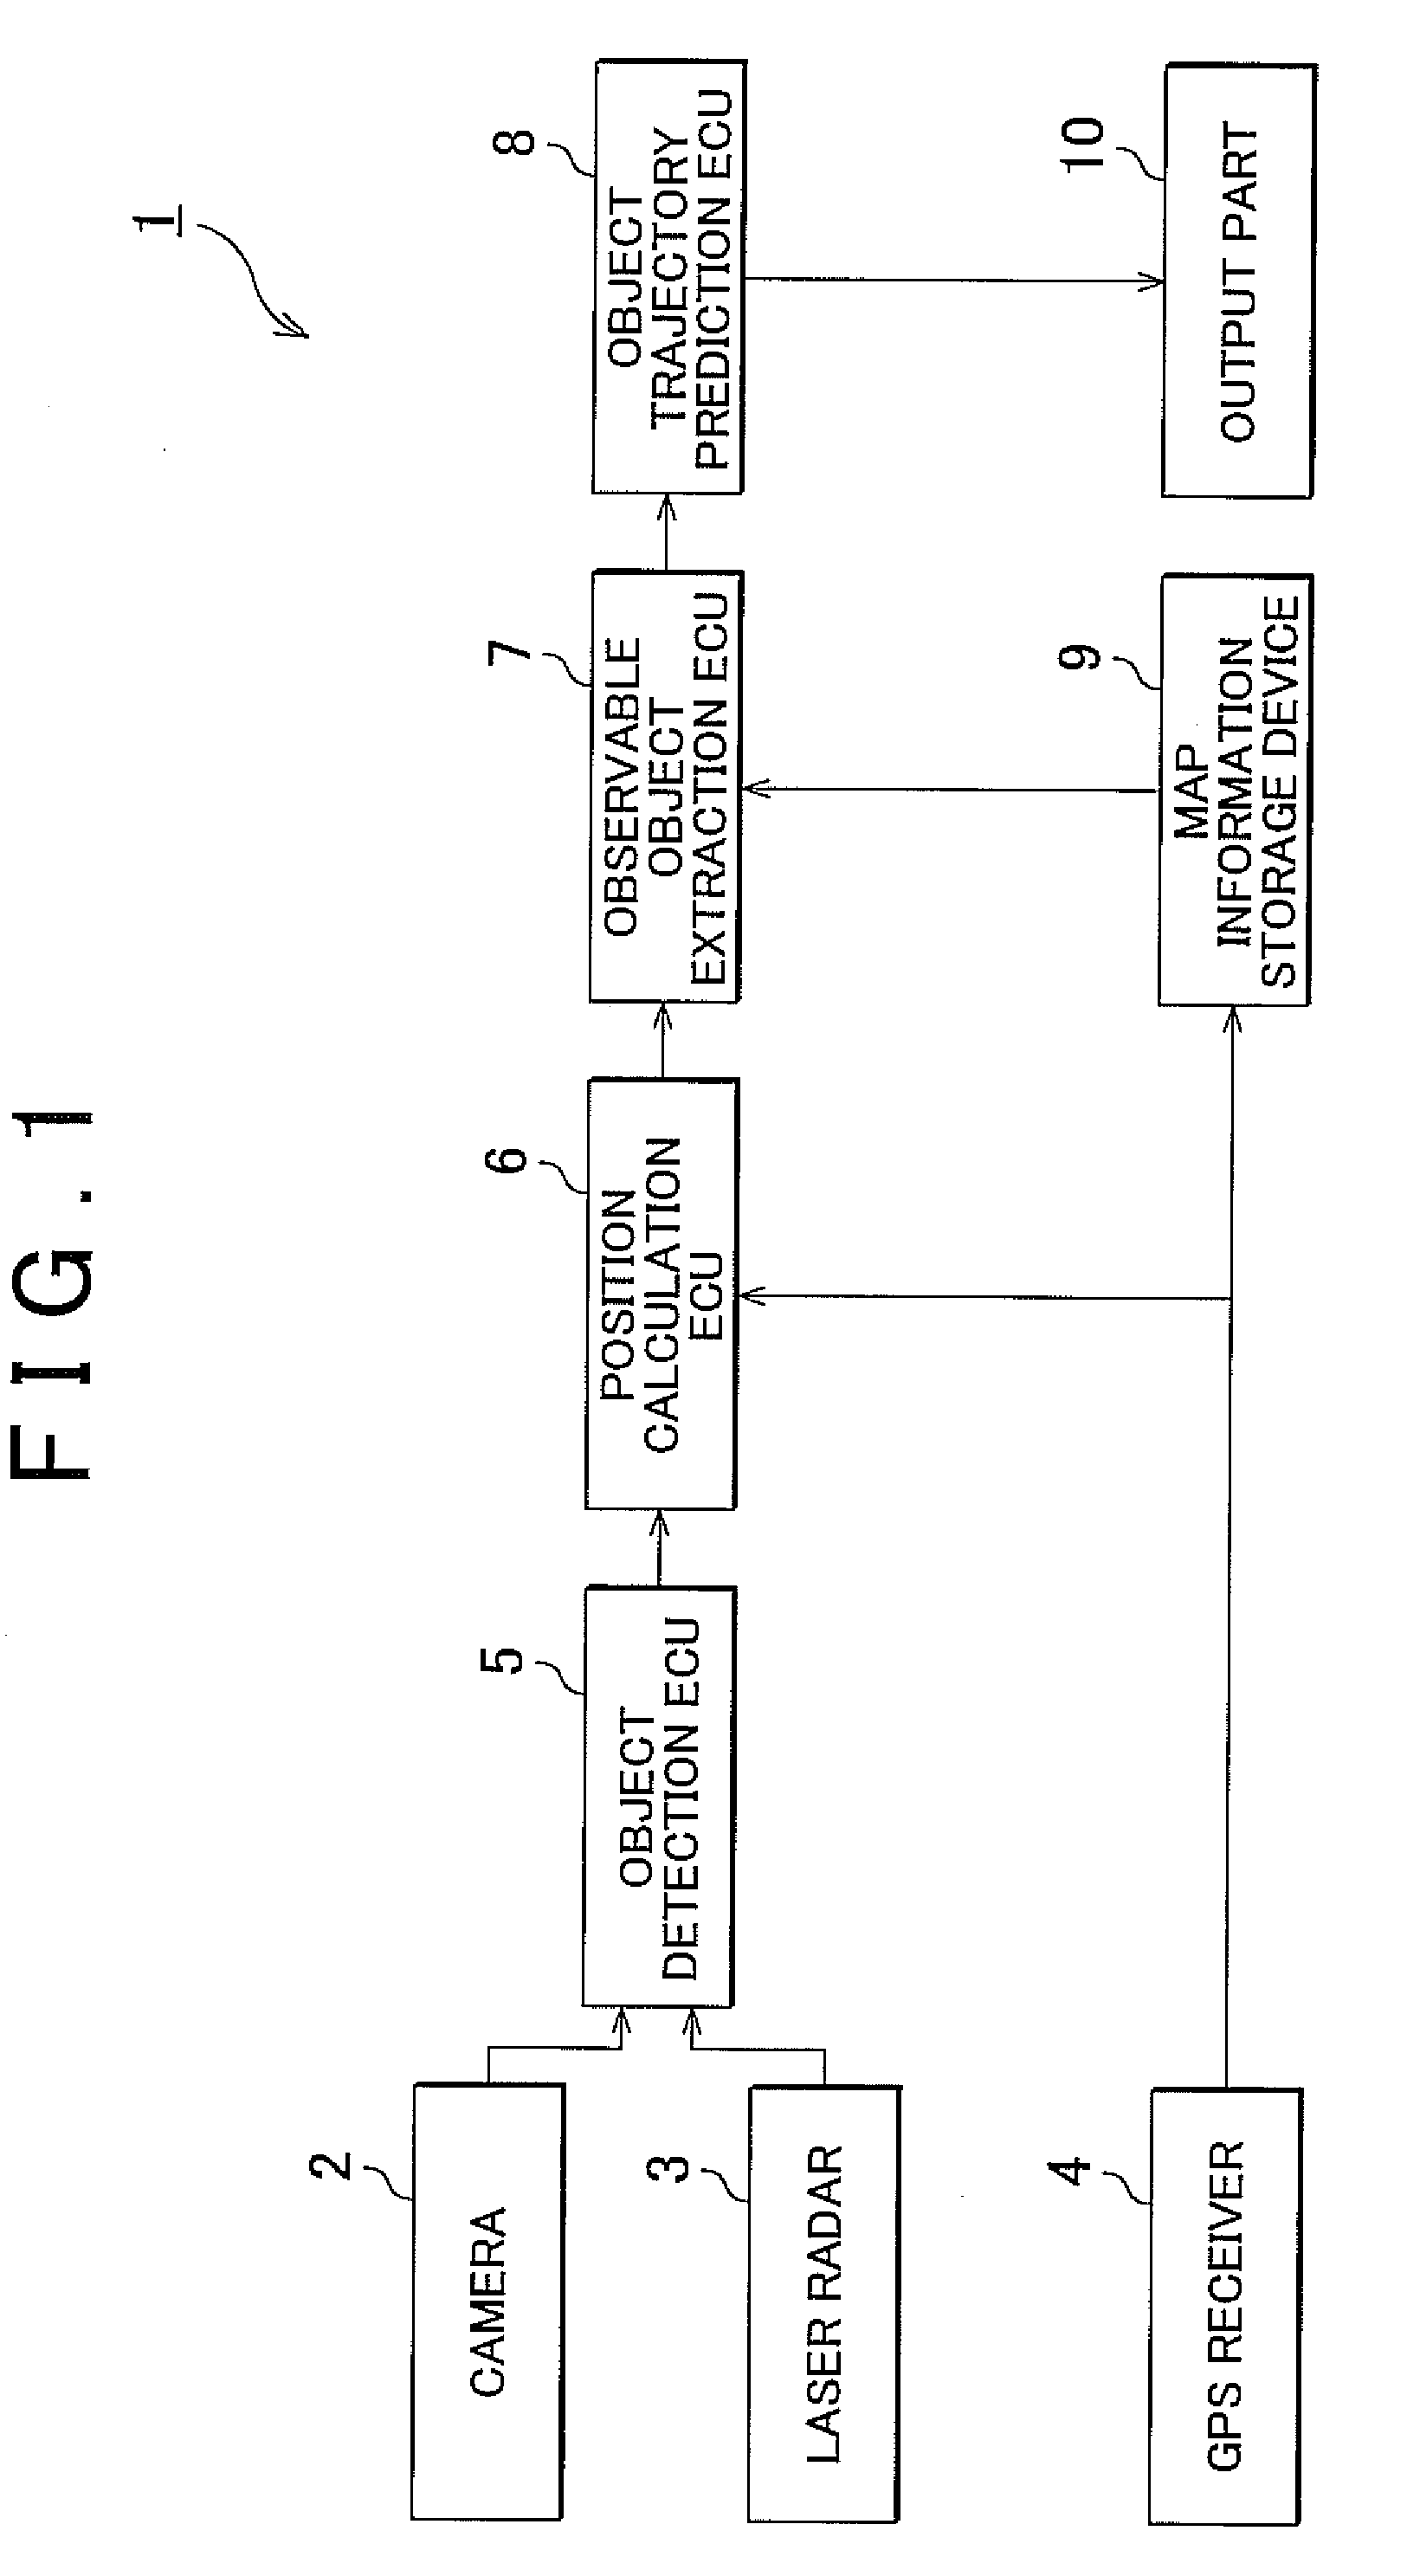 Moving object trajectory estimating device